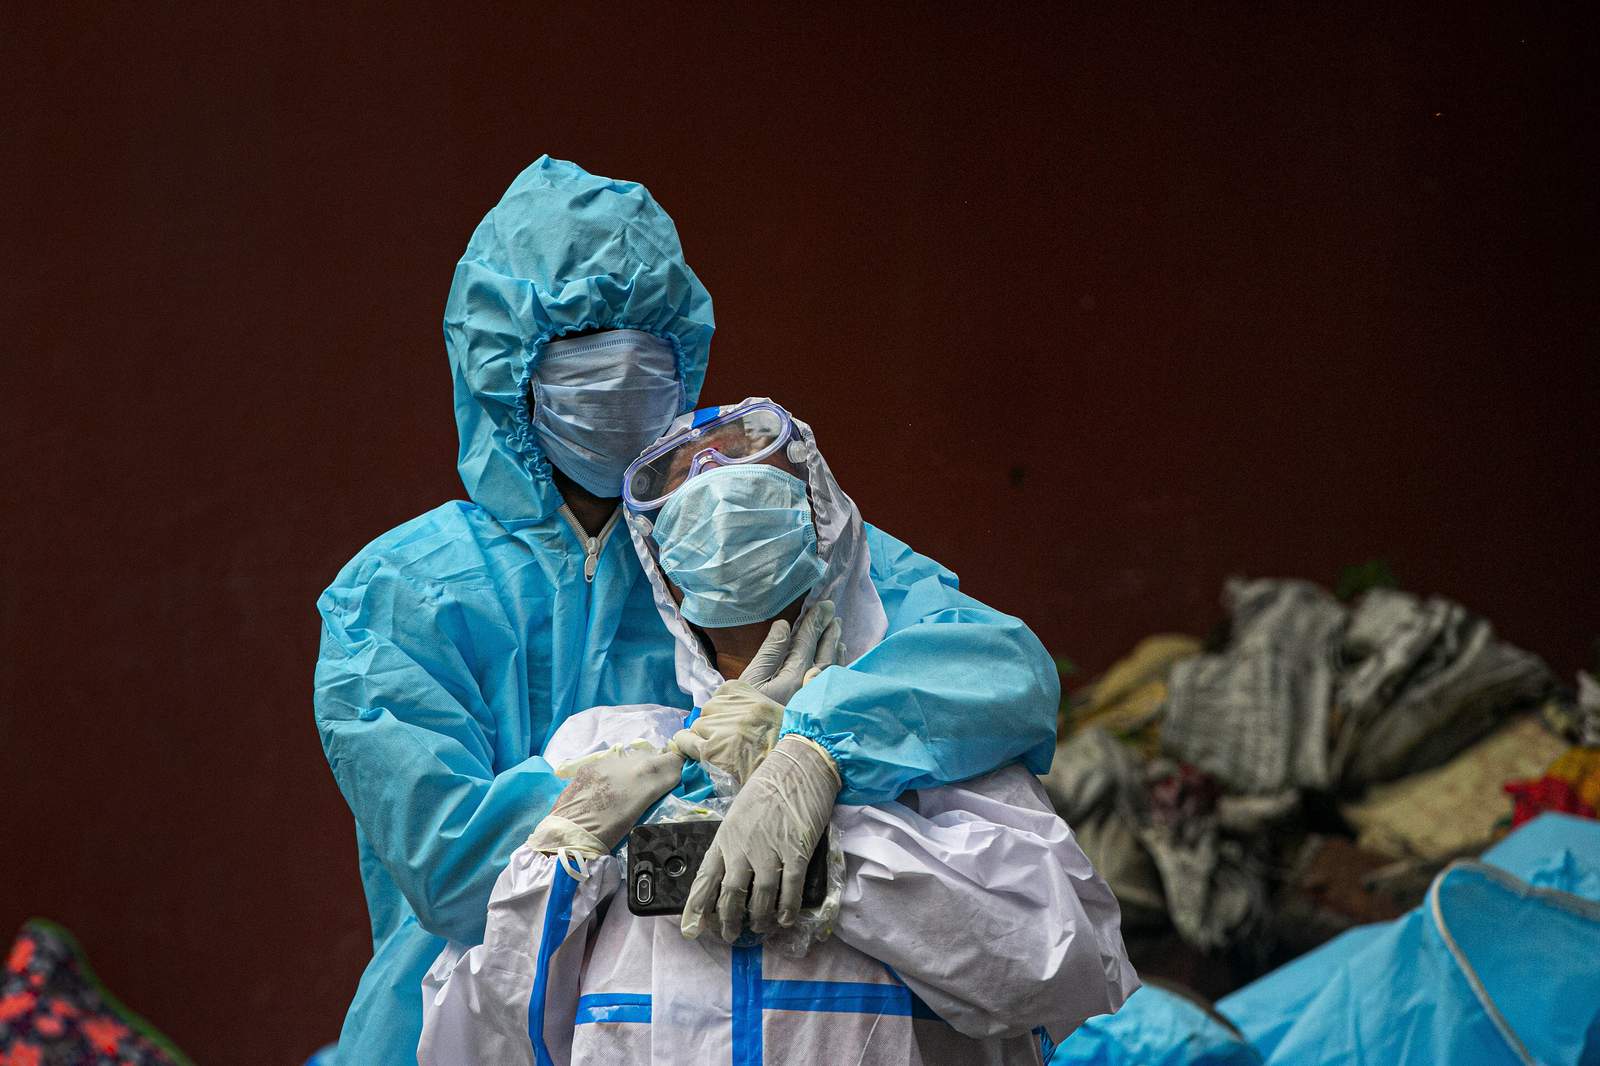 The Latest: UN chief says pandemic toll is 'mind-numbing'